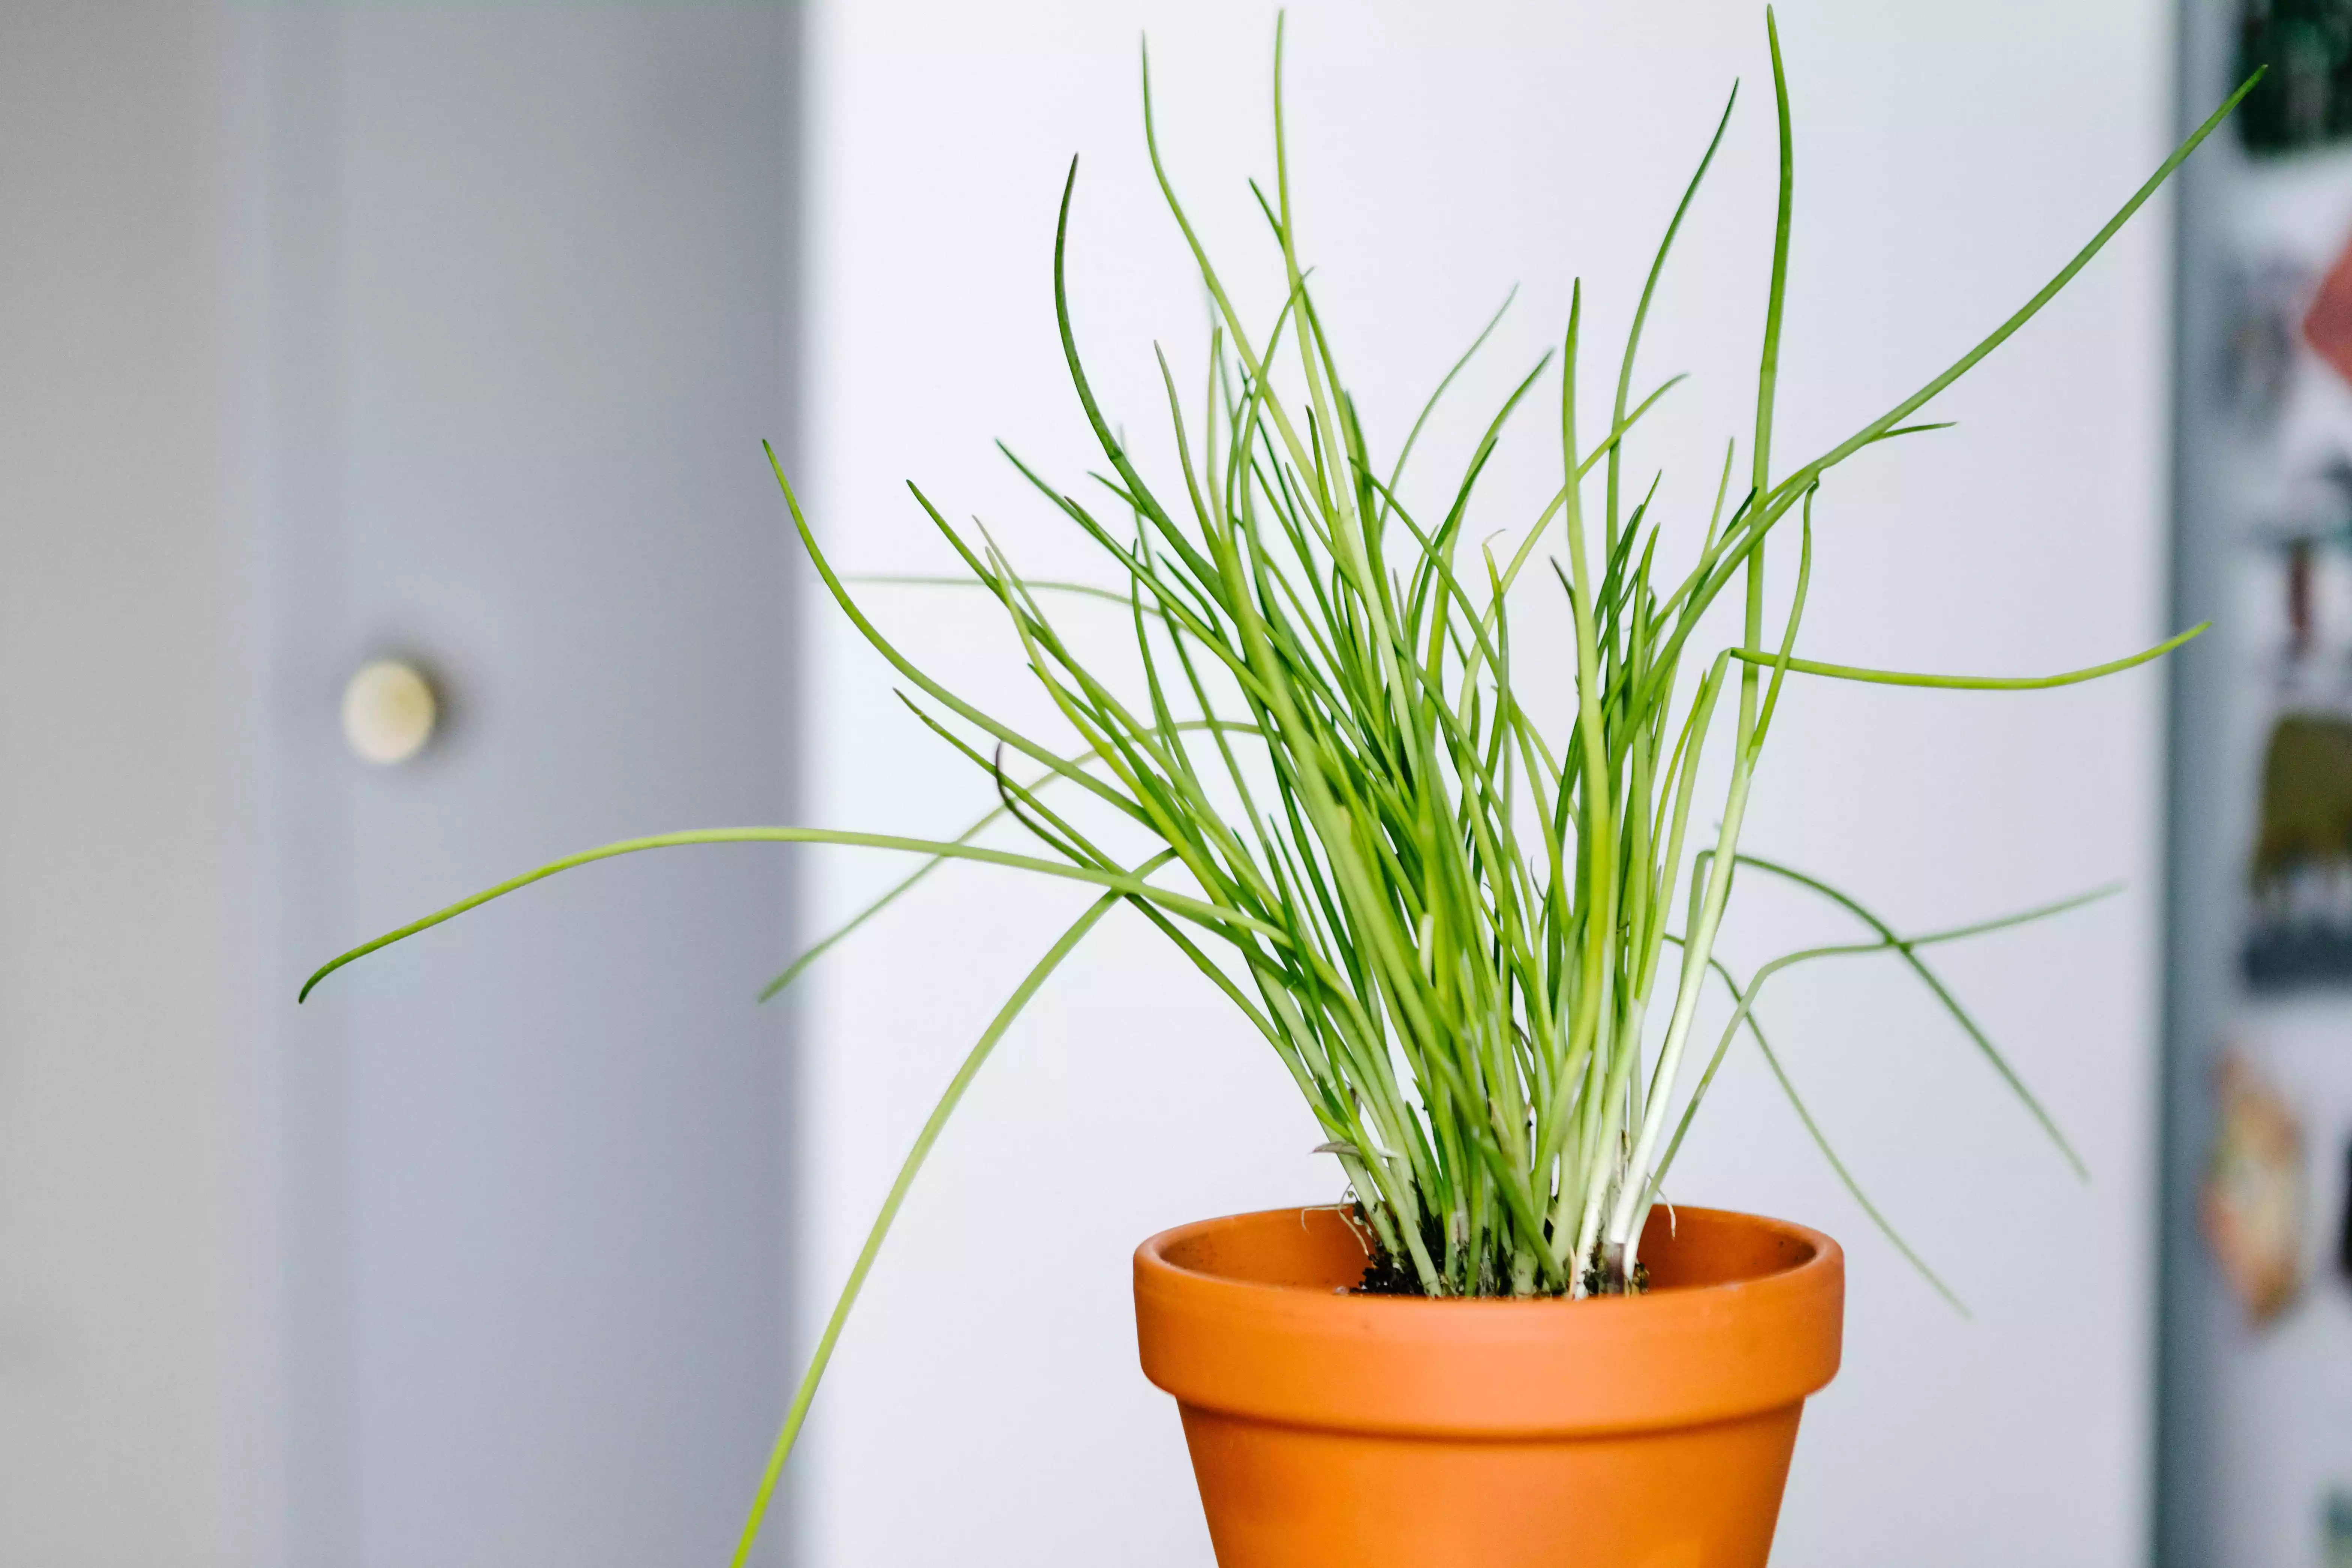 bright green chives plant in terra cotta pot in white indoor room